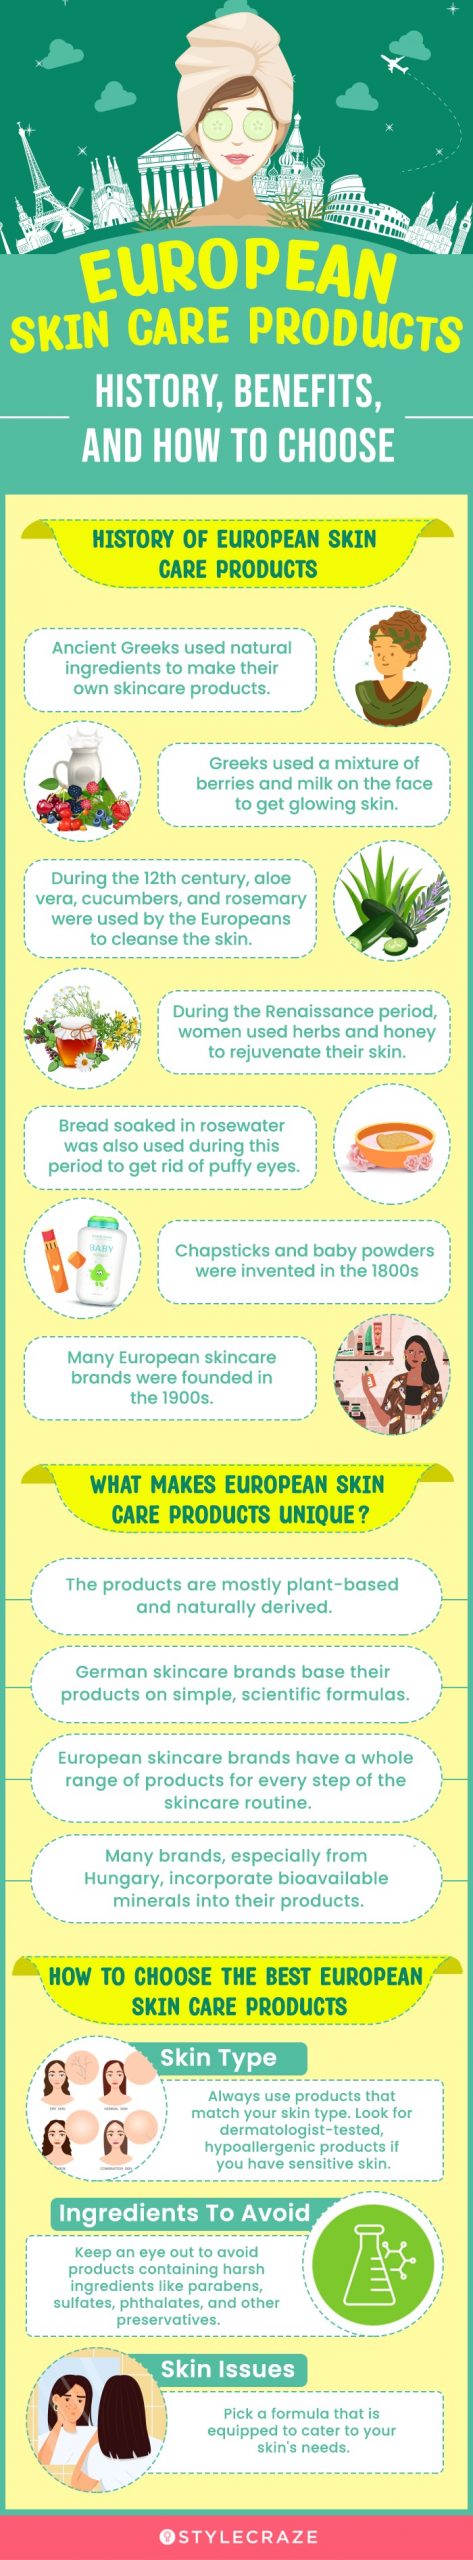 European Skincare Products: History, Benefits (infographic)